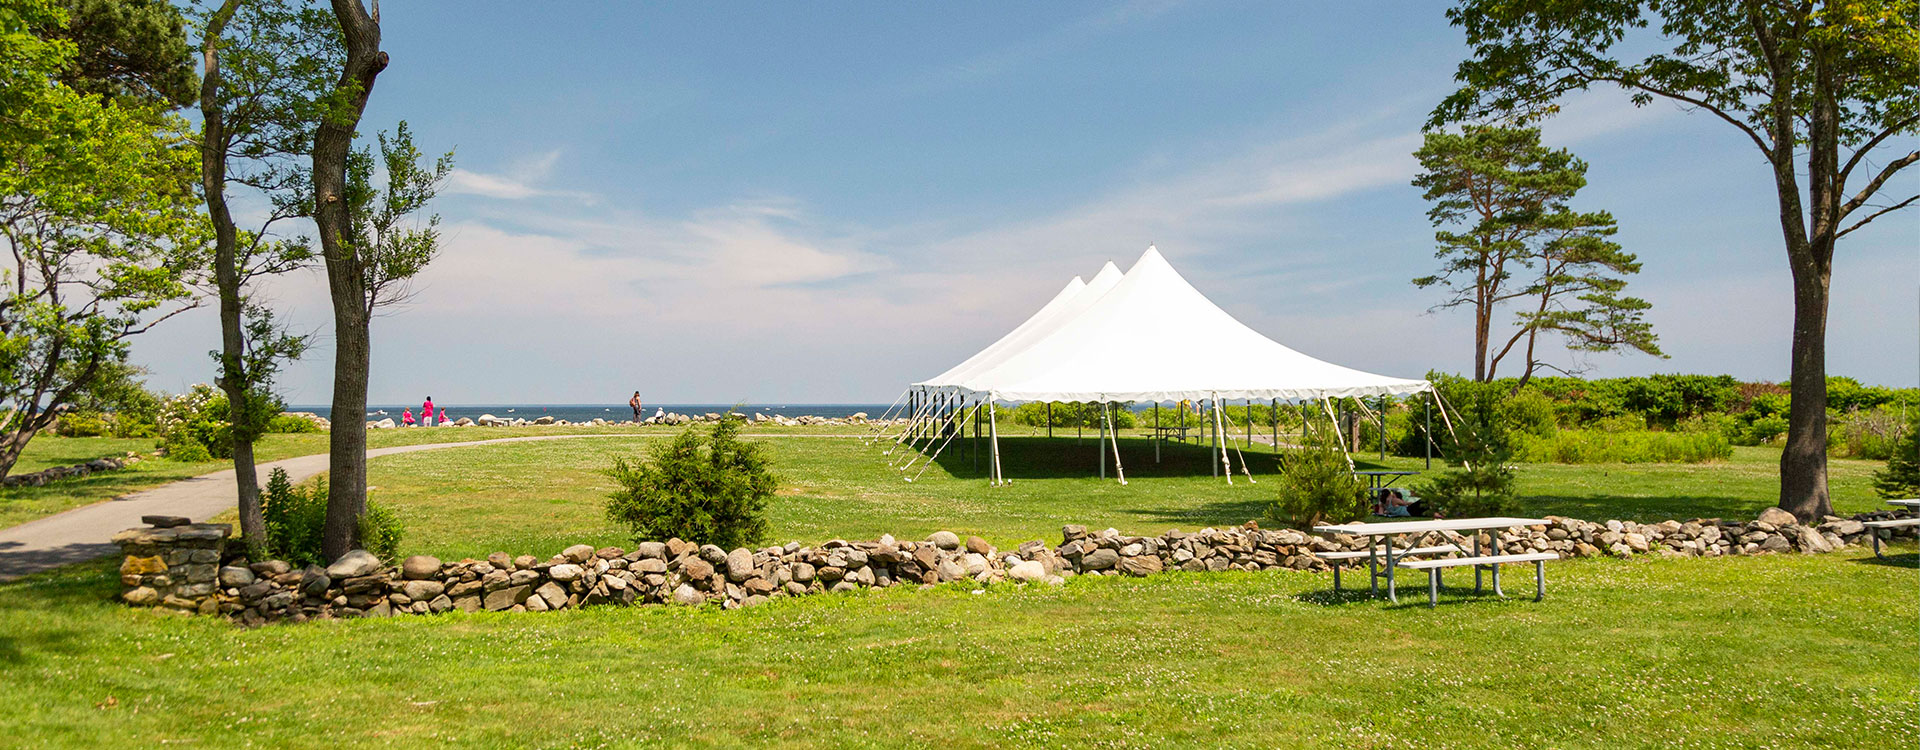 pavilion and group use area at odiorne point state park